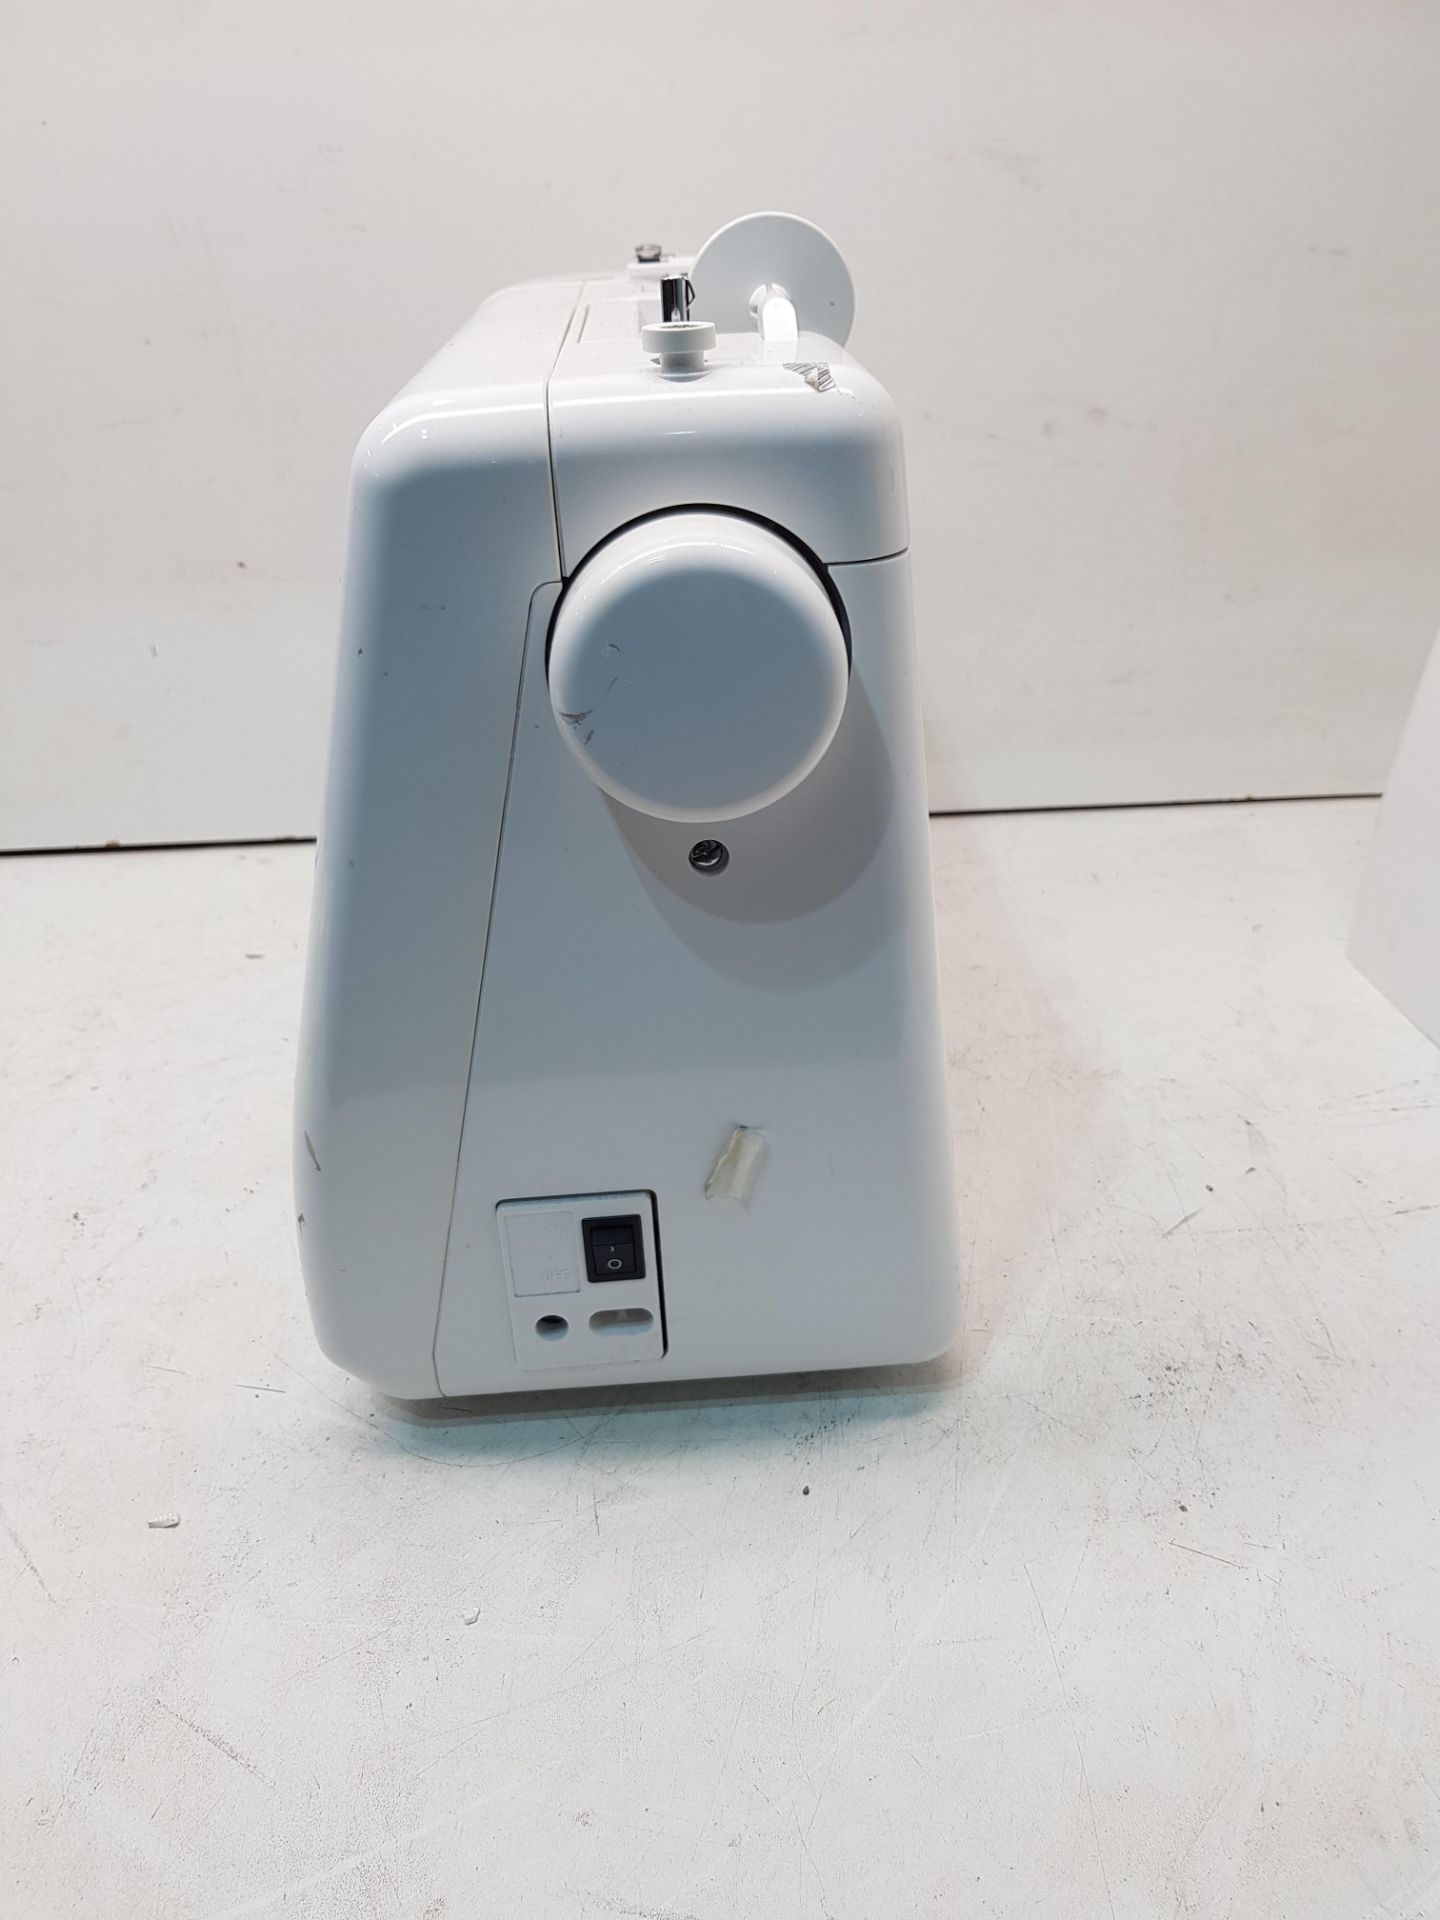 Janome SMD 3000 Sewing Machine S/N: 640085562 - Image 2 of 4